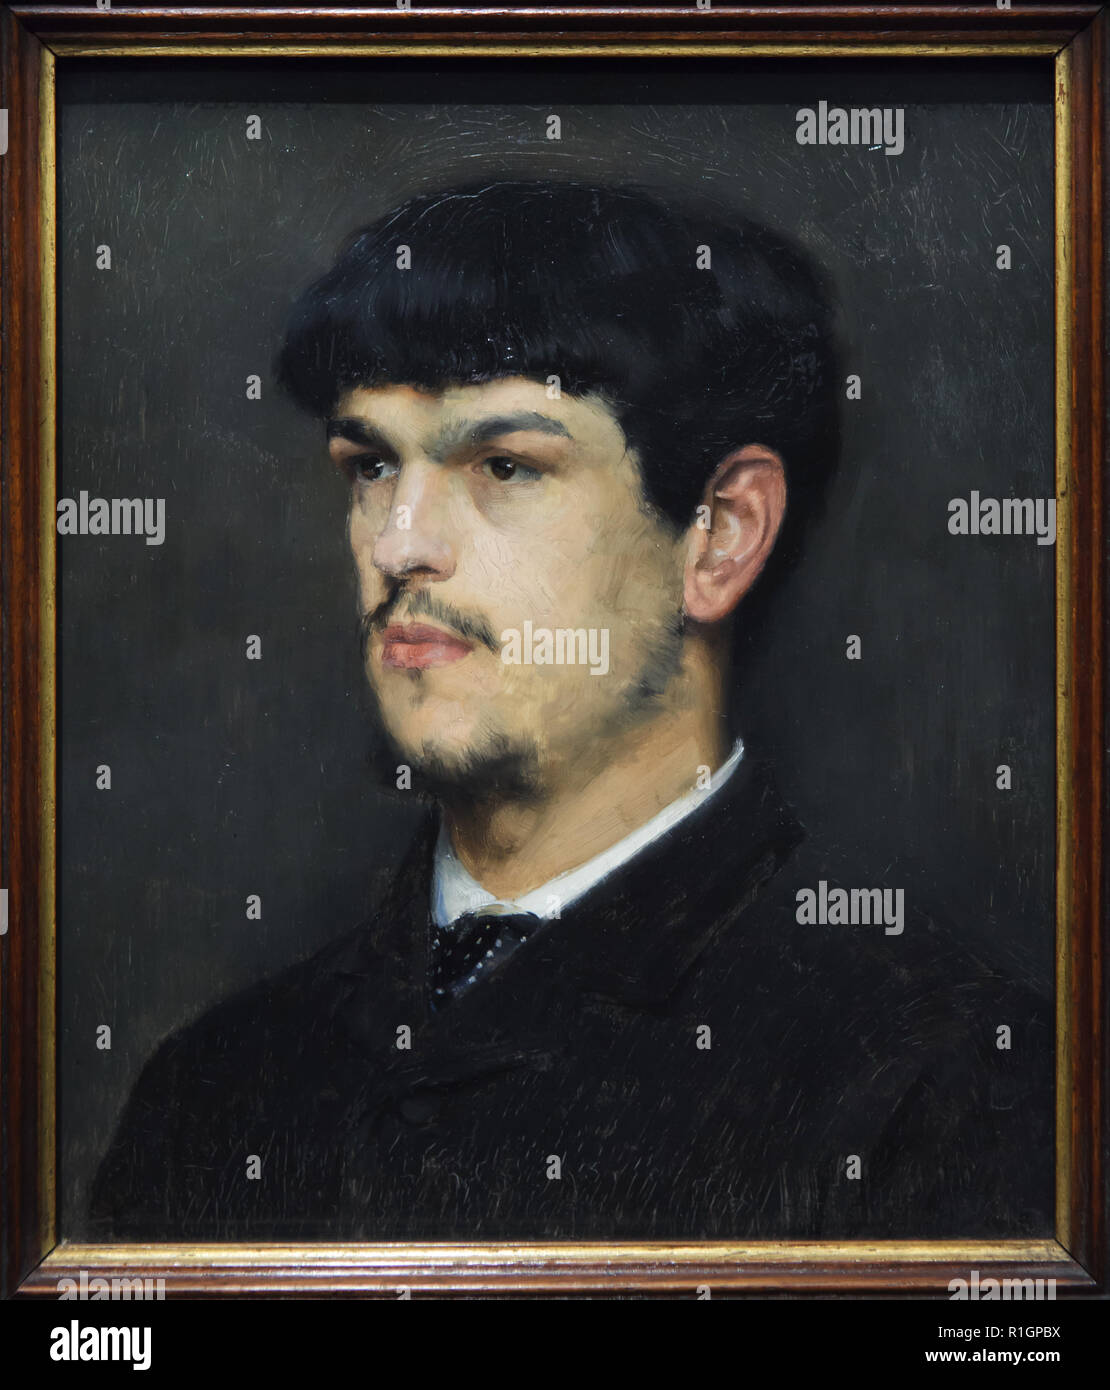 Portrait of French composer Claude Debussy by French painter Marcel Baschet (1884) on display at the exhibition devoted to Symbolism in the Baltic States in the Musée d'Orsay in Paris, France. Stock Photo